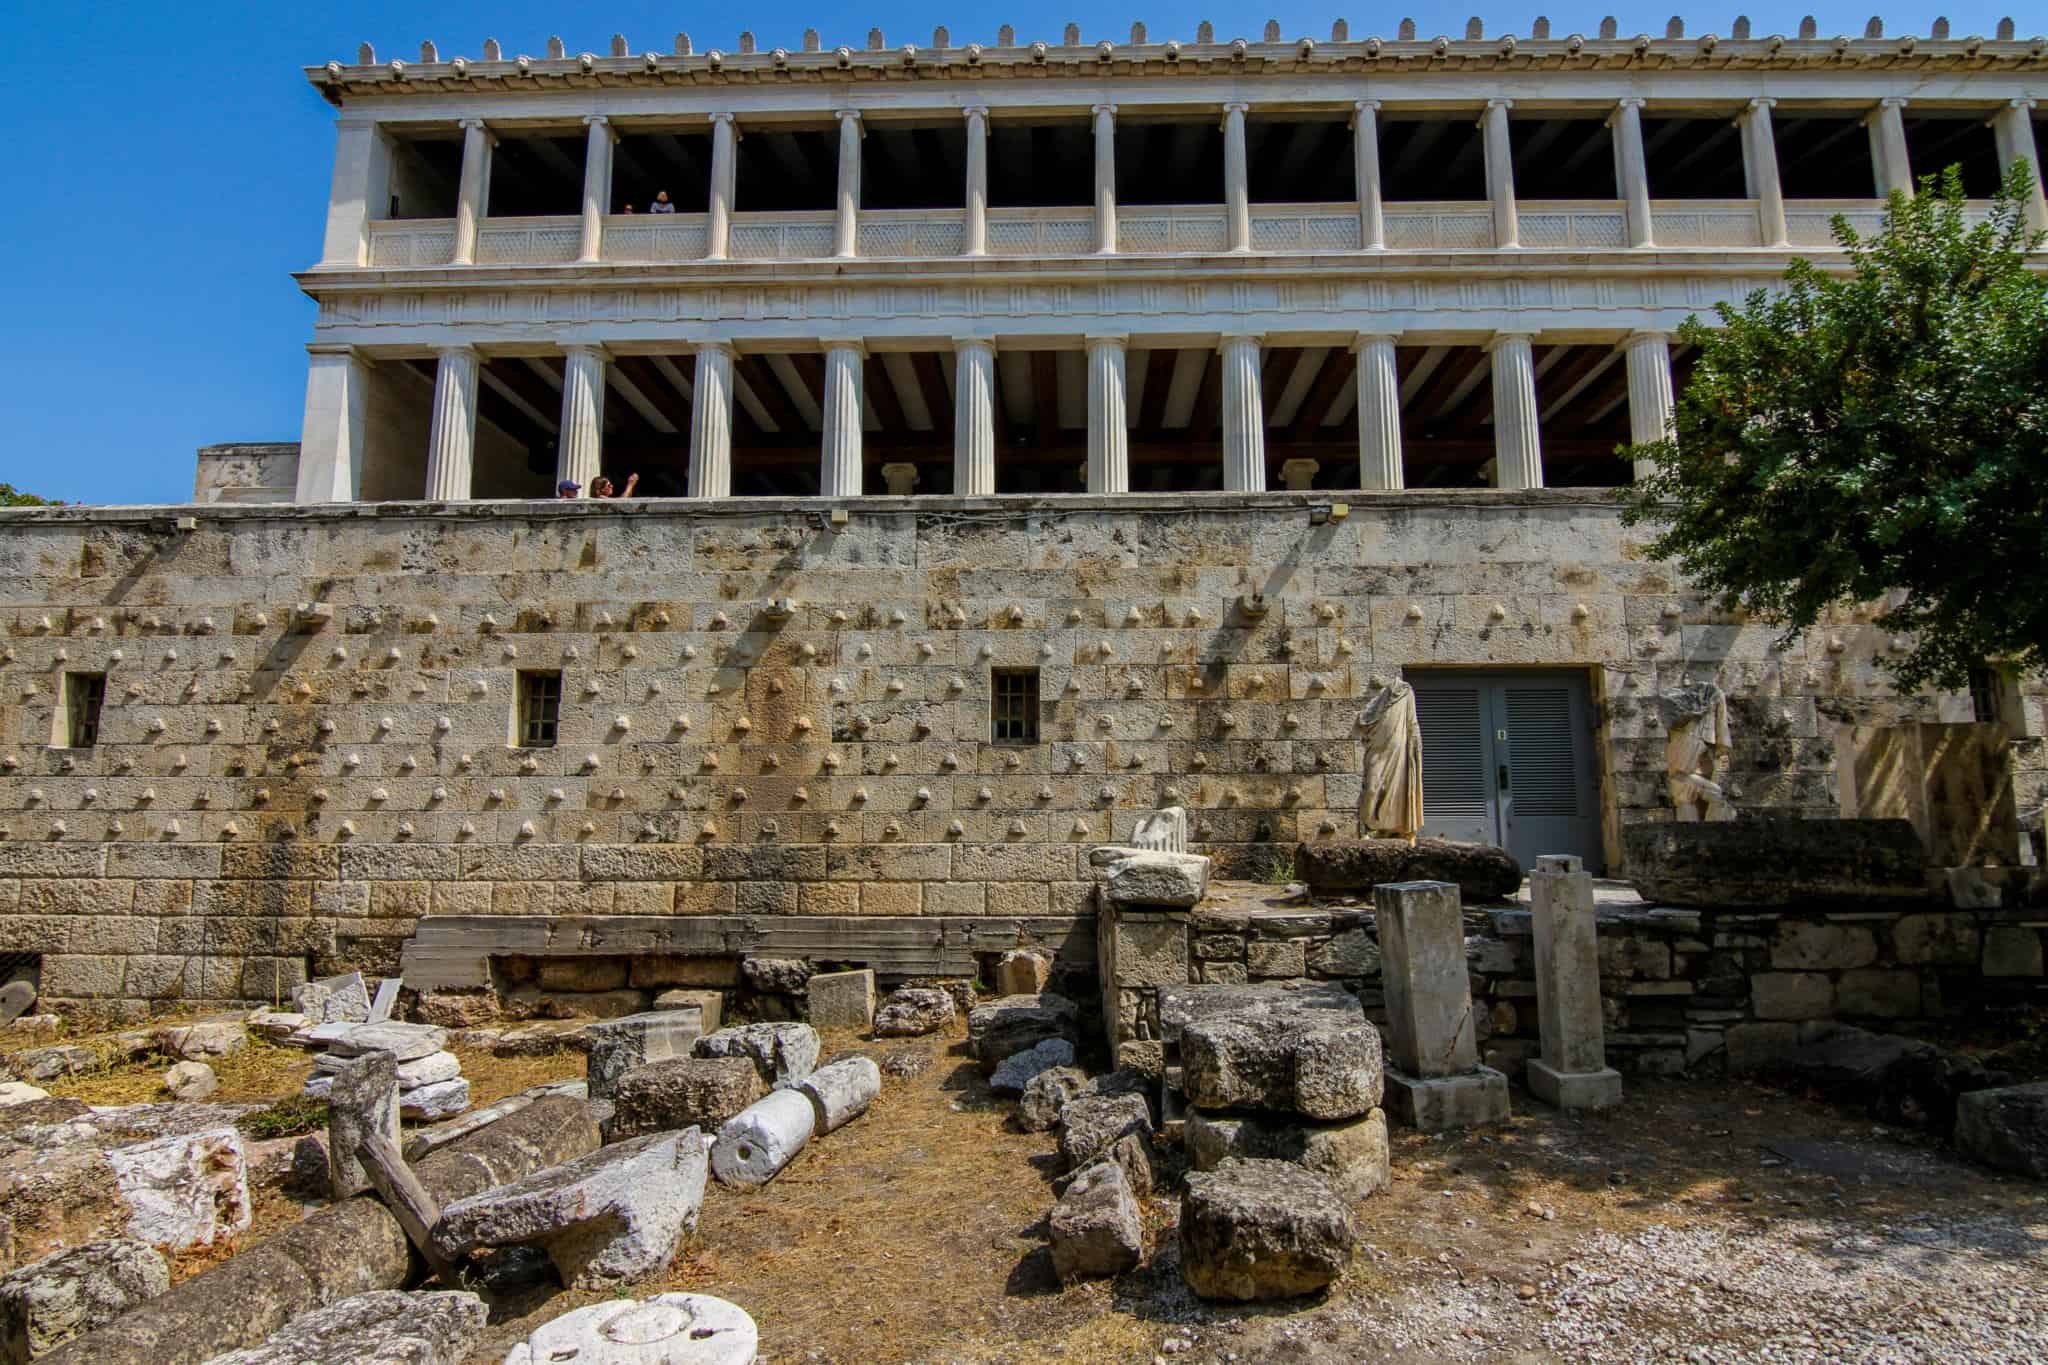 The Ancient Agora is one of the ruins in Athens